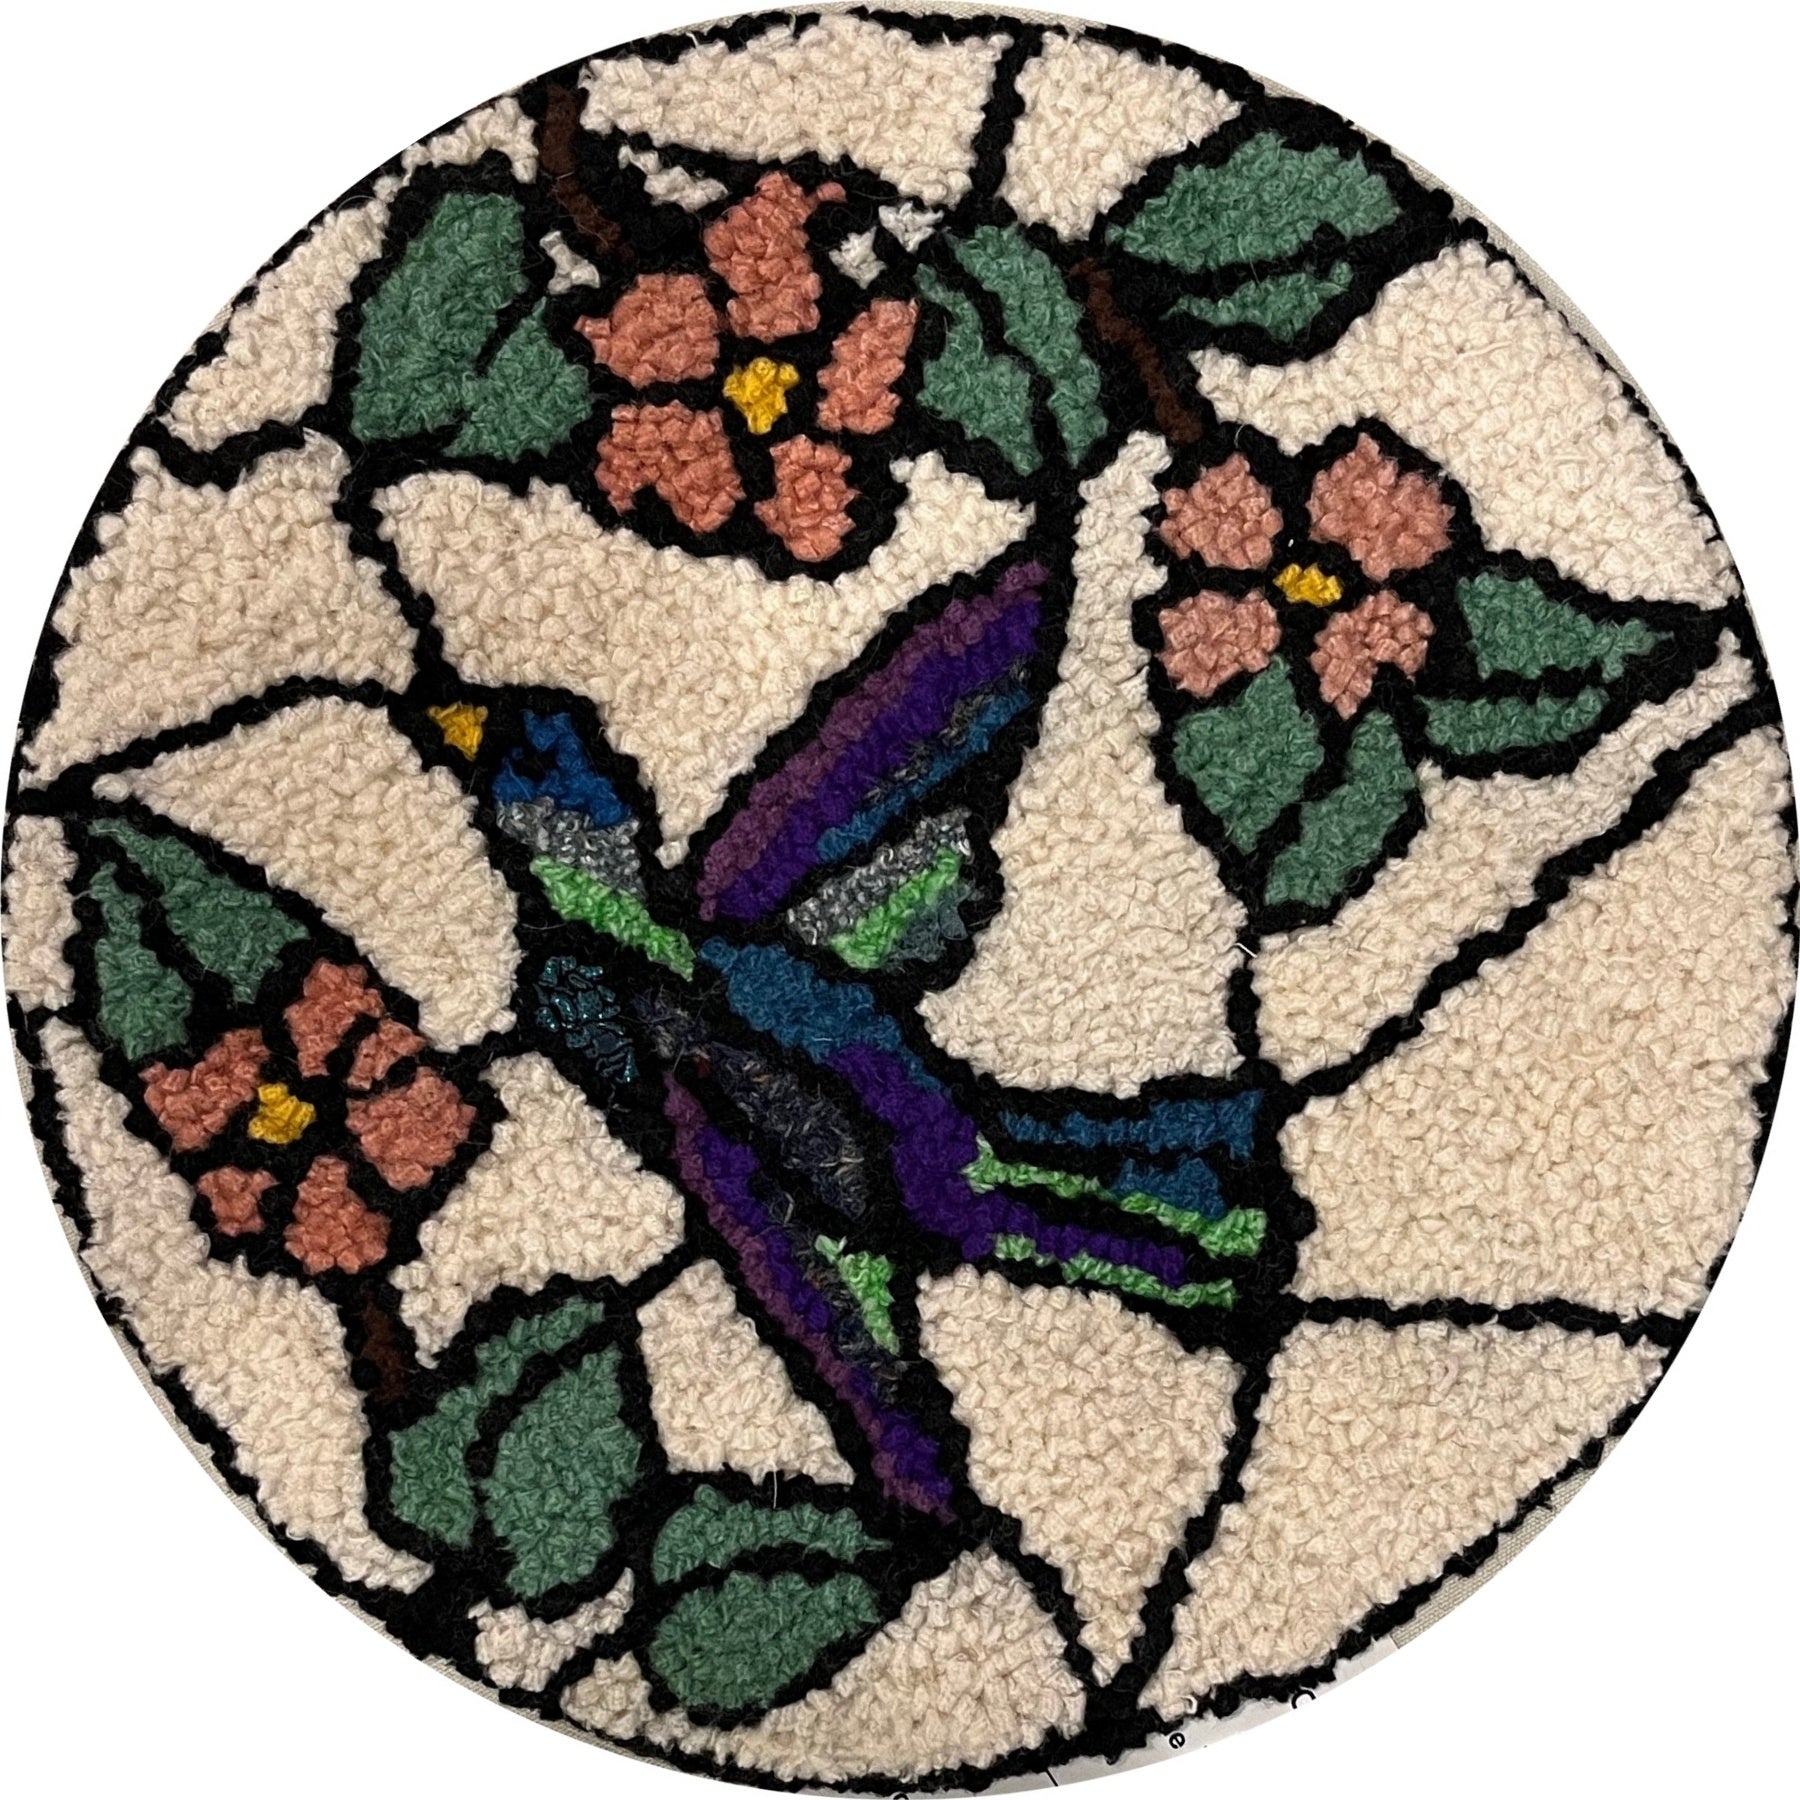 Stained Glass Hummingbird, rug hooked by Connie Barnett